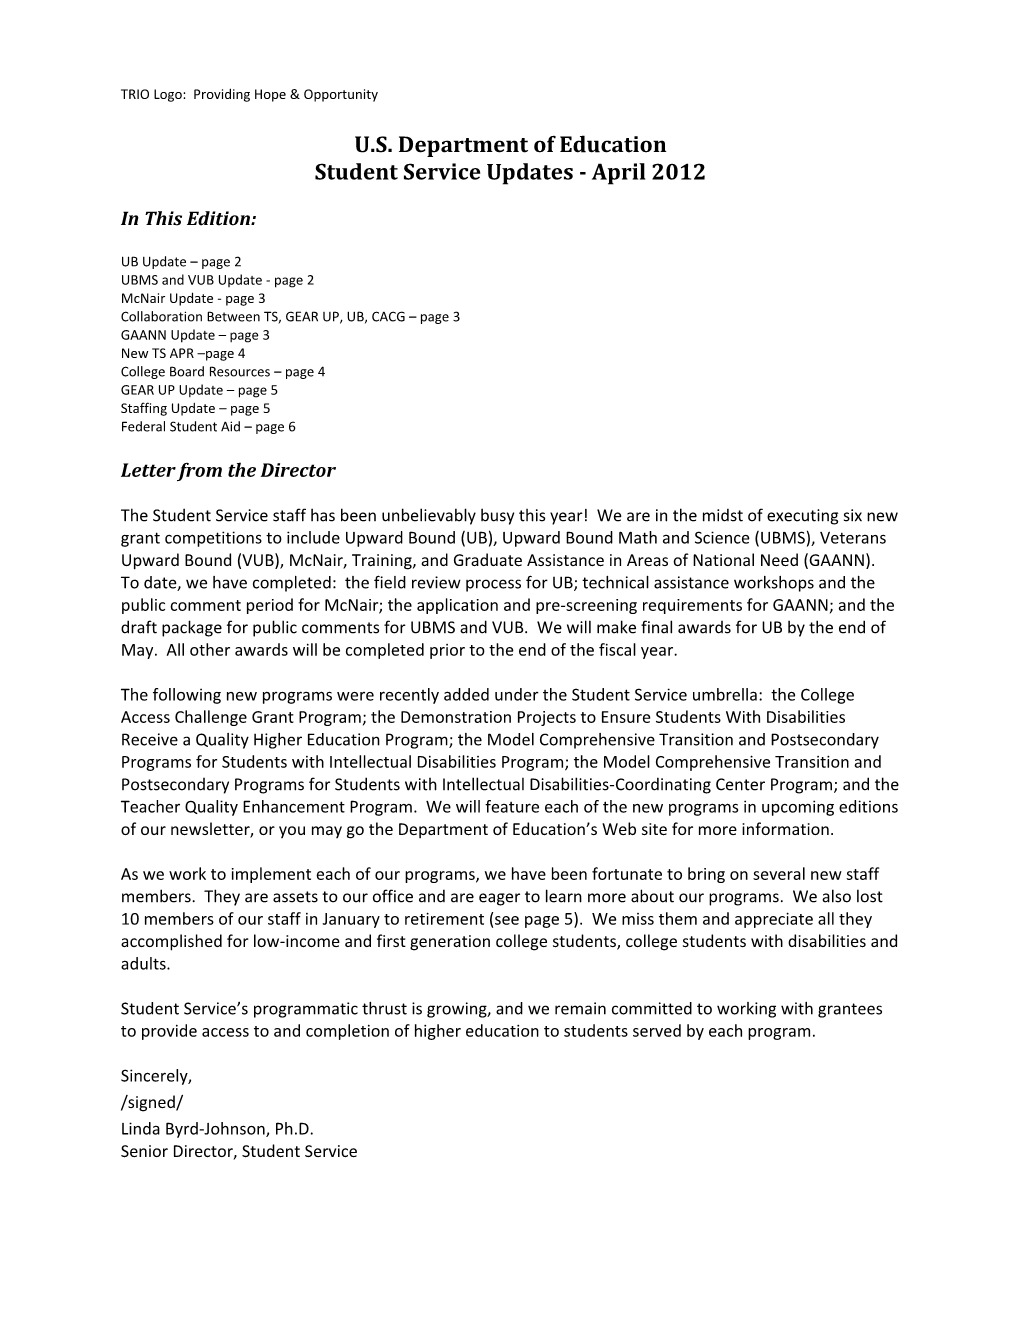 Student Service Updates April 2012 Newsletter (MS Word)